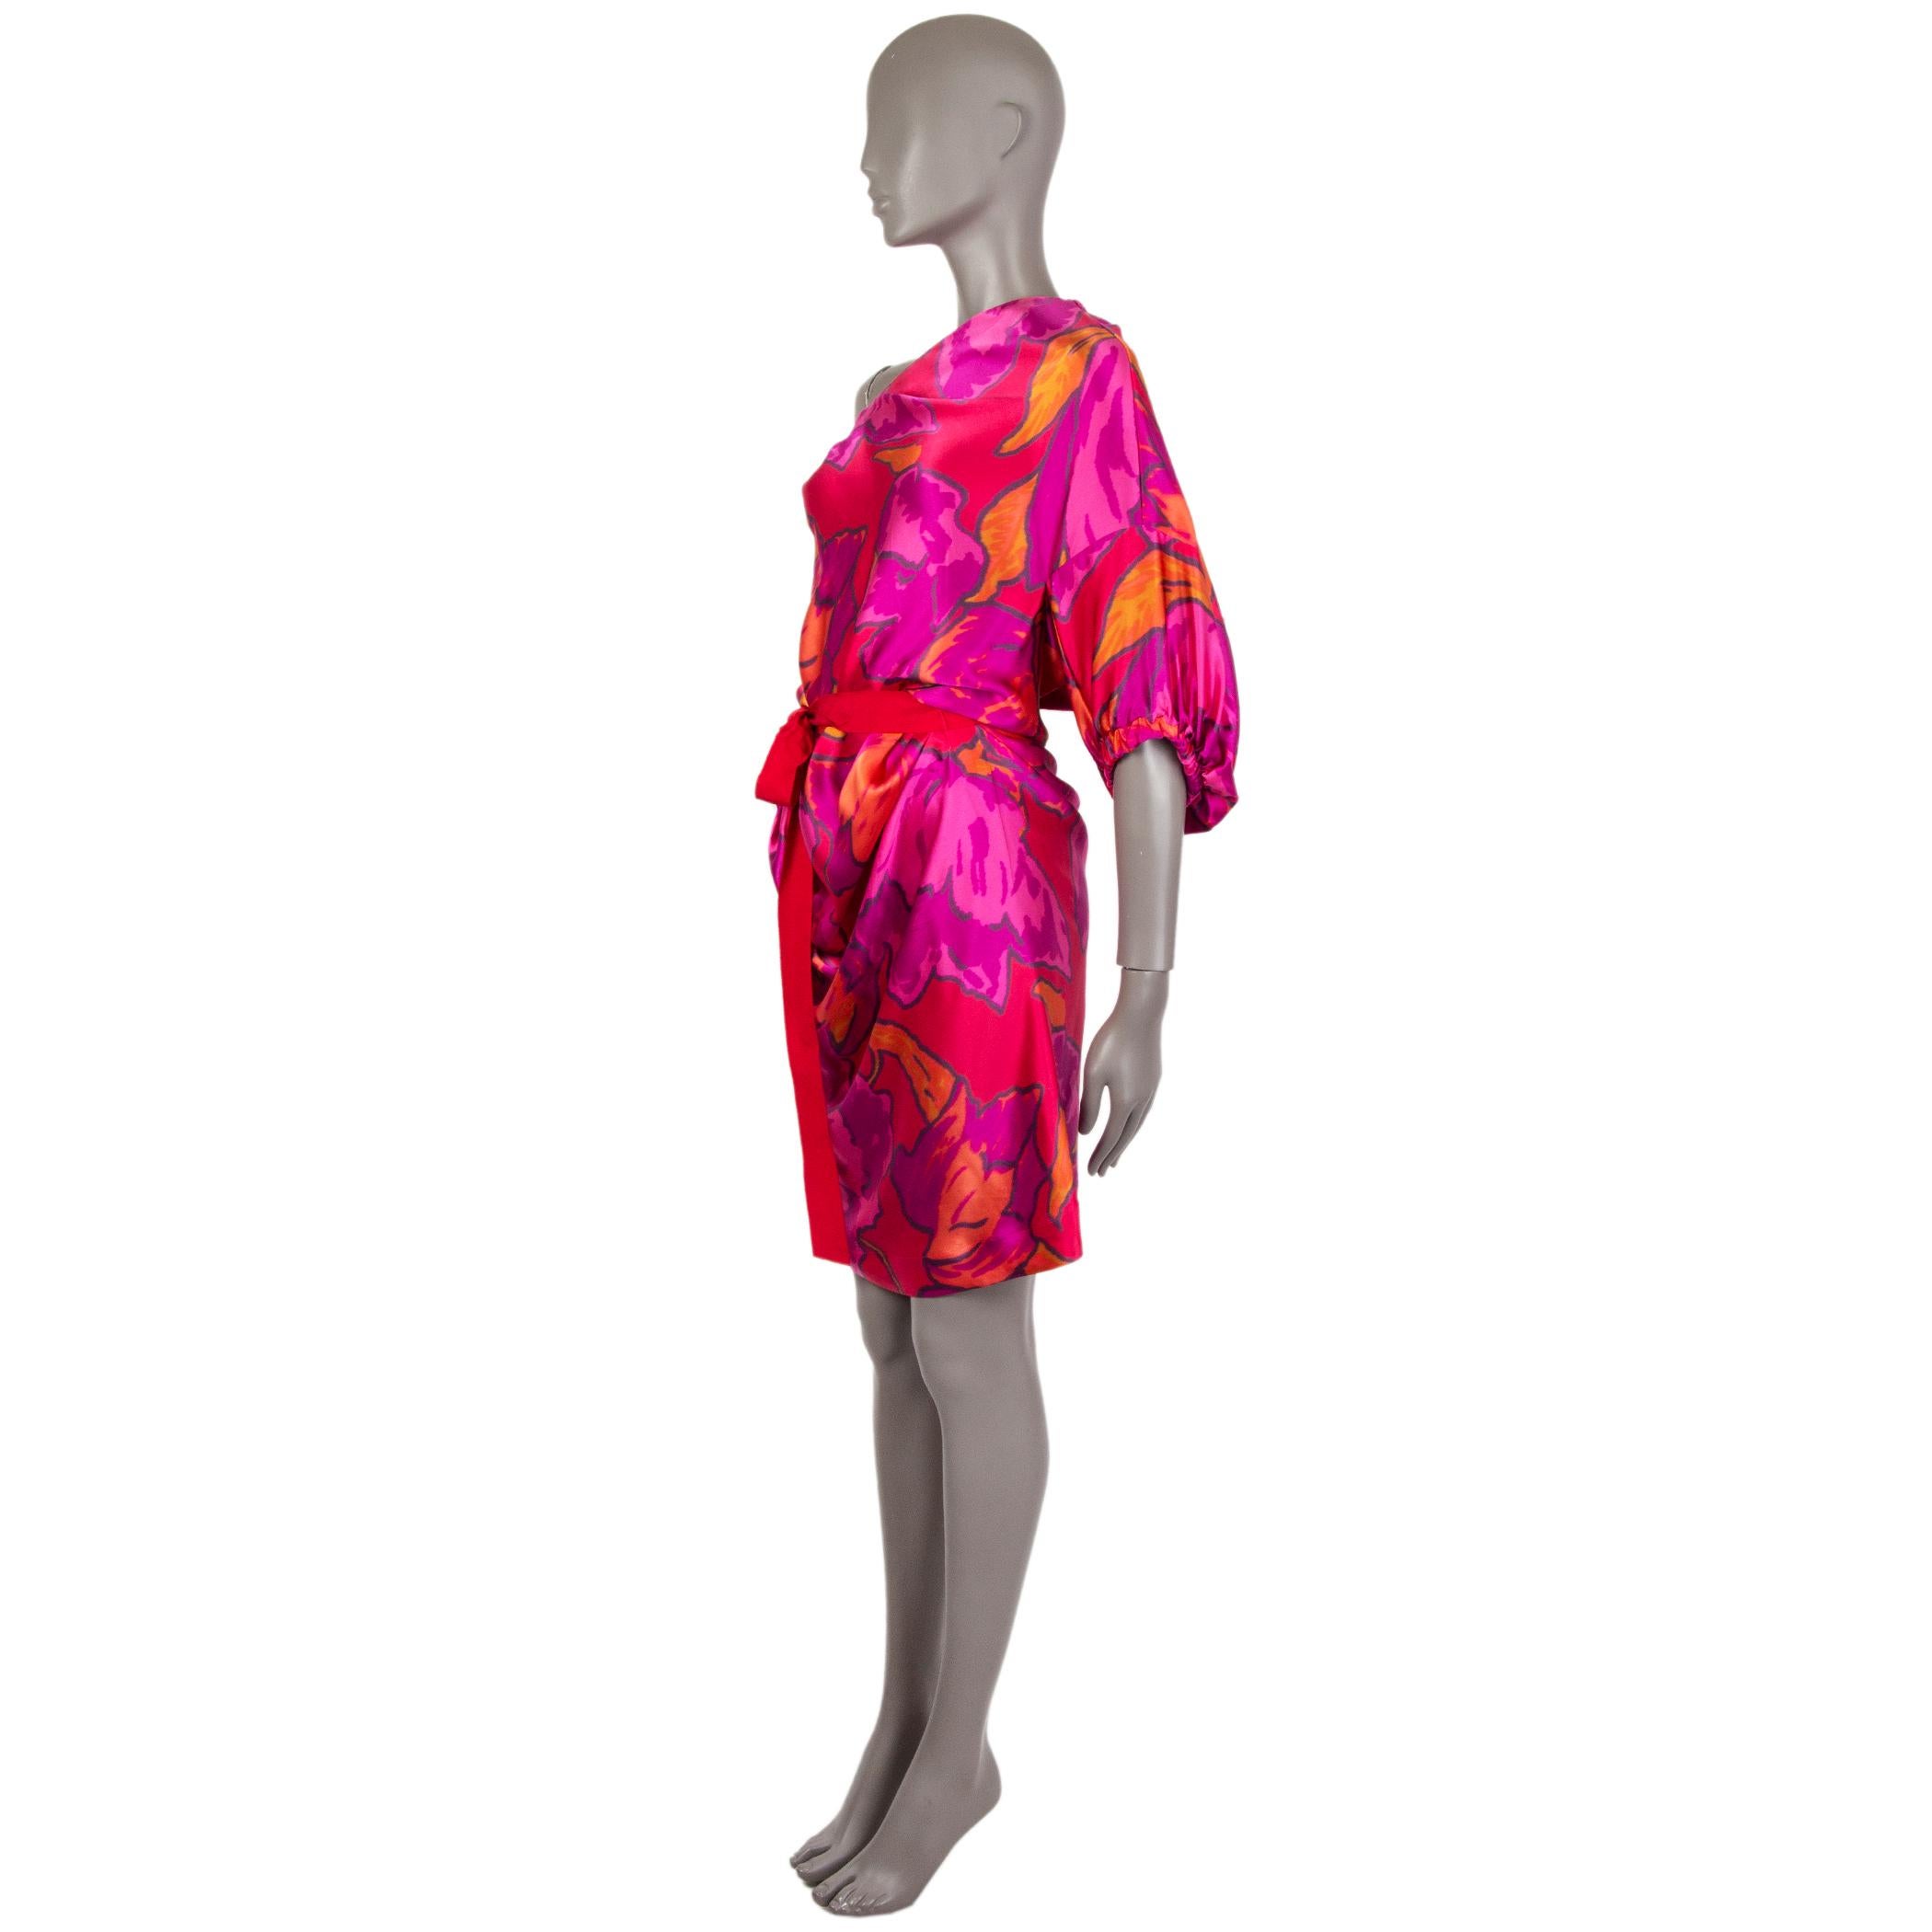 100% authentic Lanvin 3/4-sleeve floral dress in red, fuchsia and black silk (100%) with an asymmetrical neck. Closes on the back and on the side with zipper. Comes with a ribbon belt. Has been worn and is in excellent condition. 

Measurements
Tag